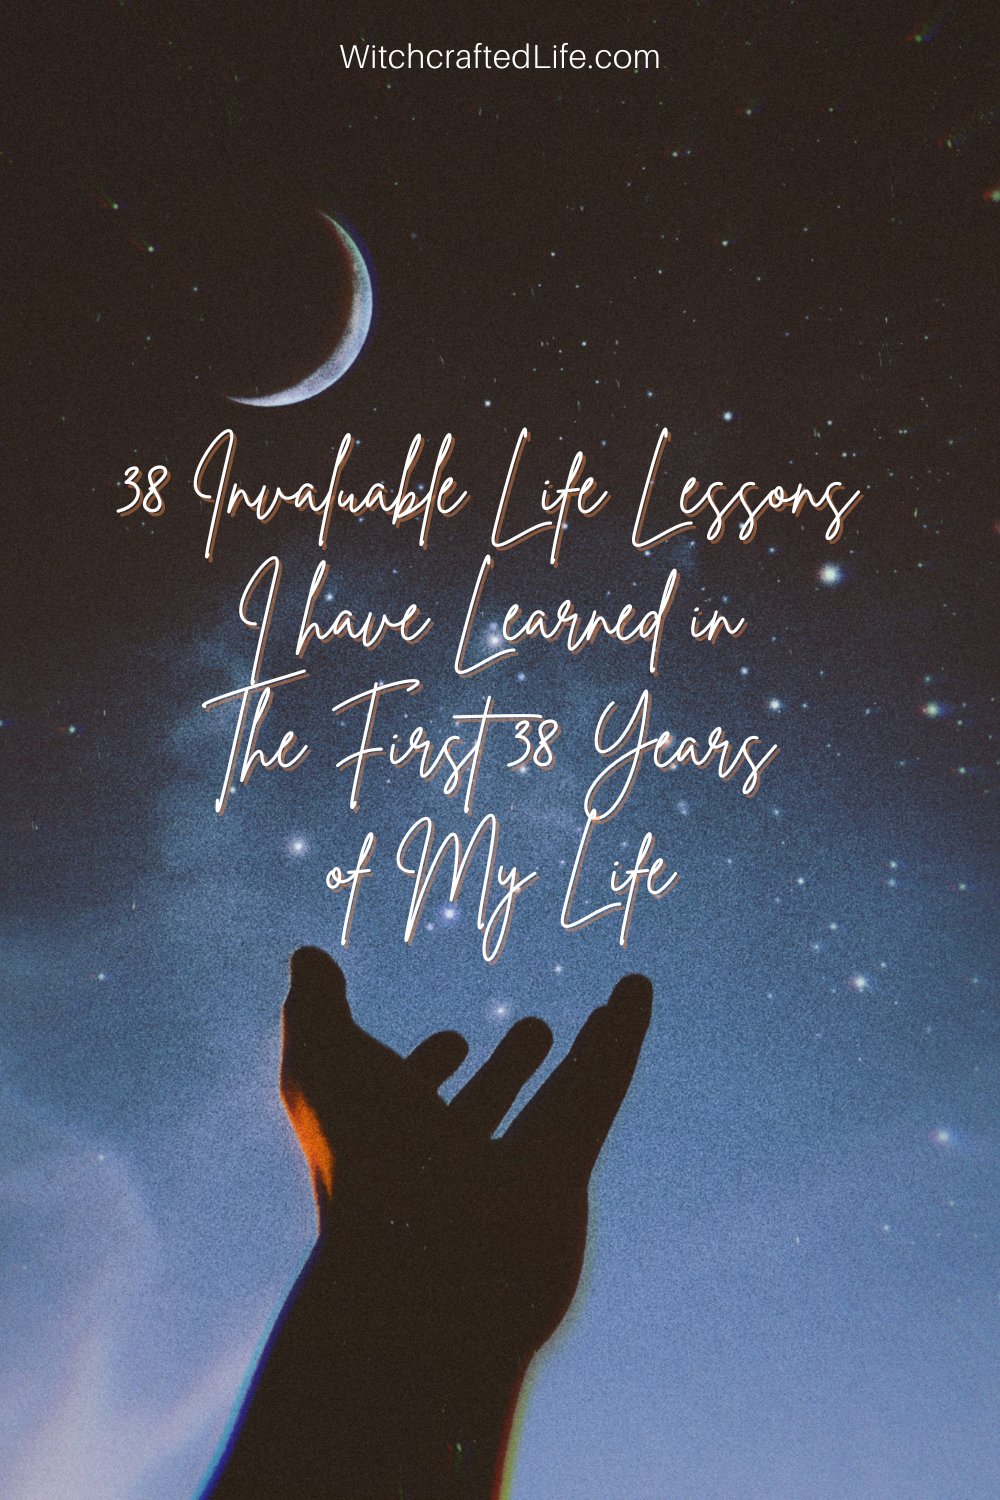 38 Invaluable Life Lessons I have Learned in the first 38 years of my life - graphic of two hands reaching for the night sky